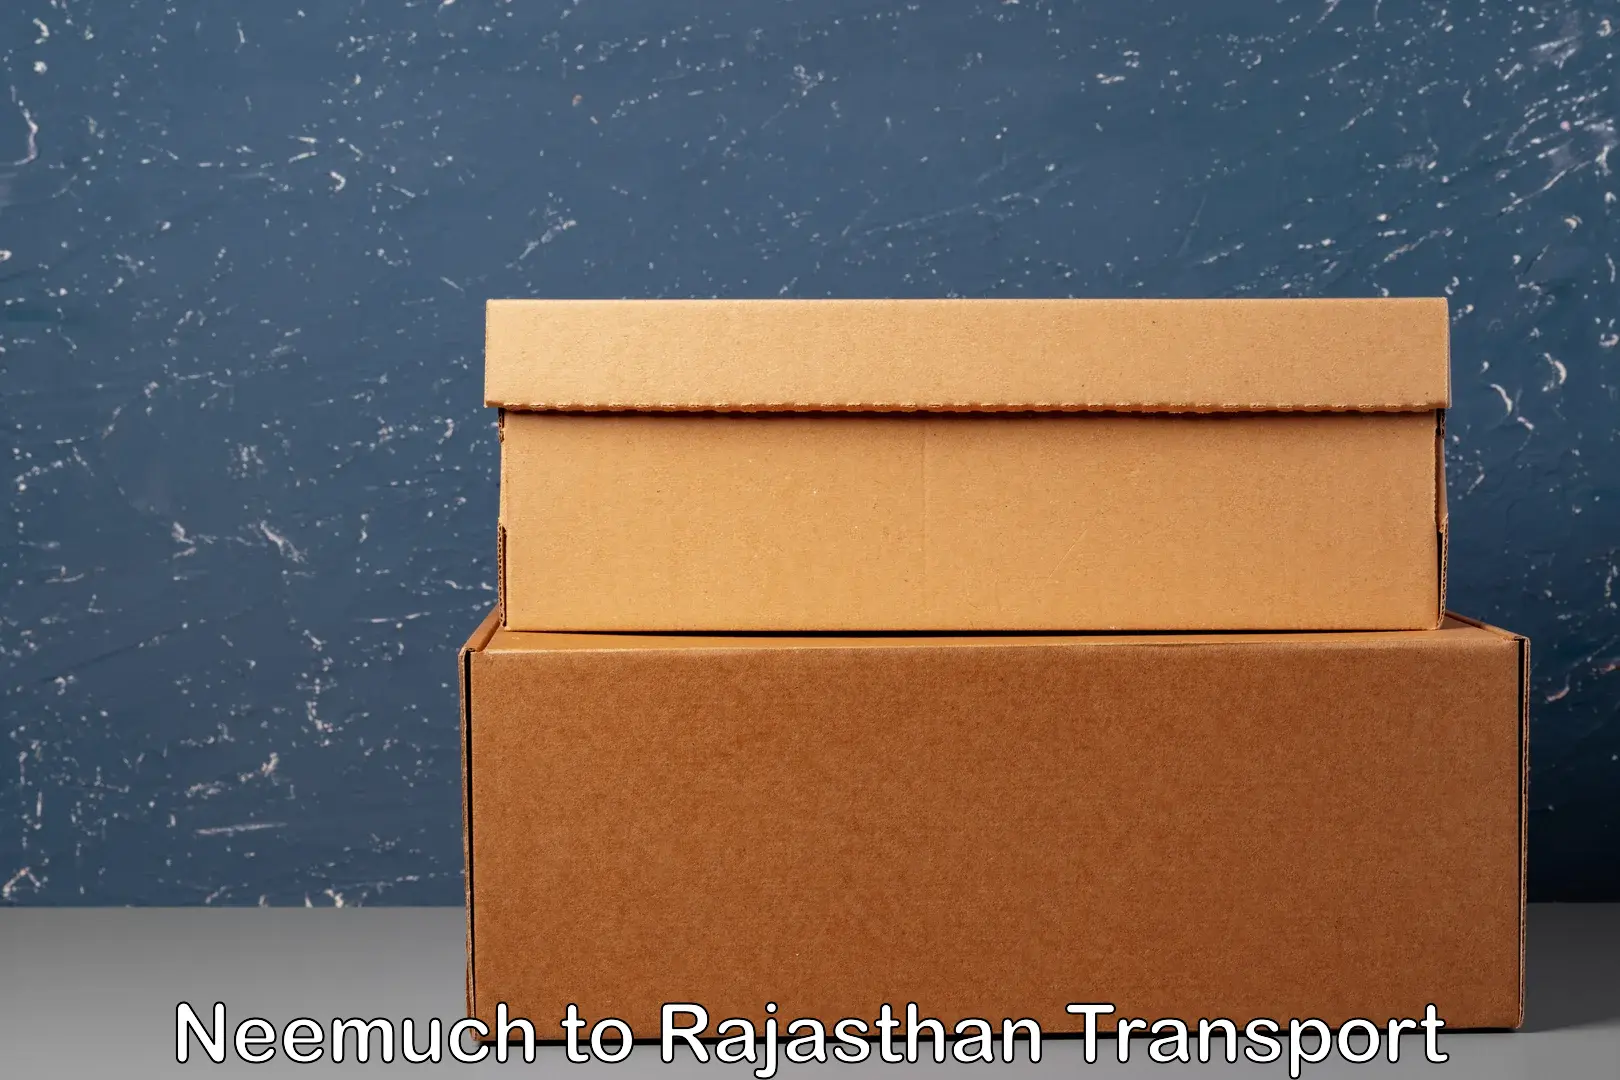 Transport in sharing in Neemuch to Rajasthan